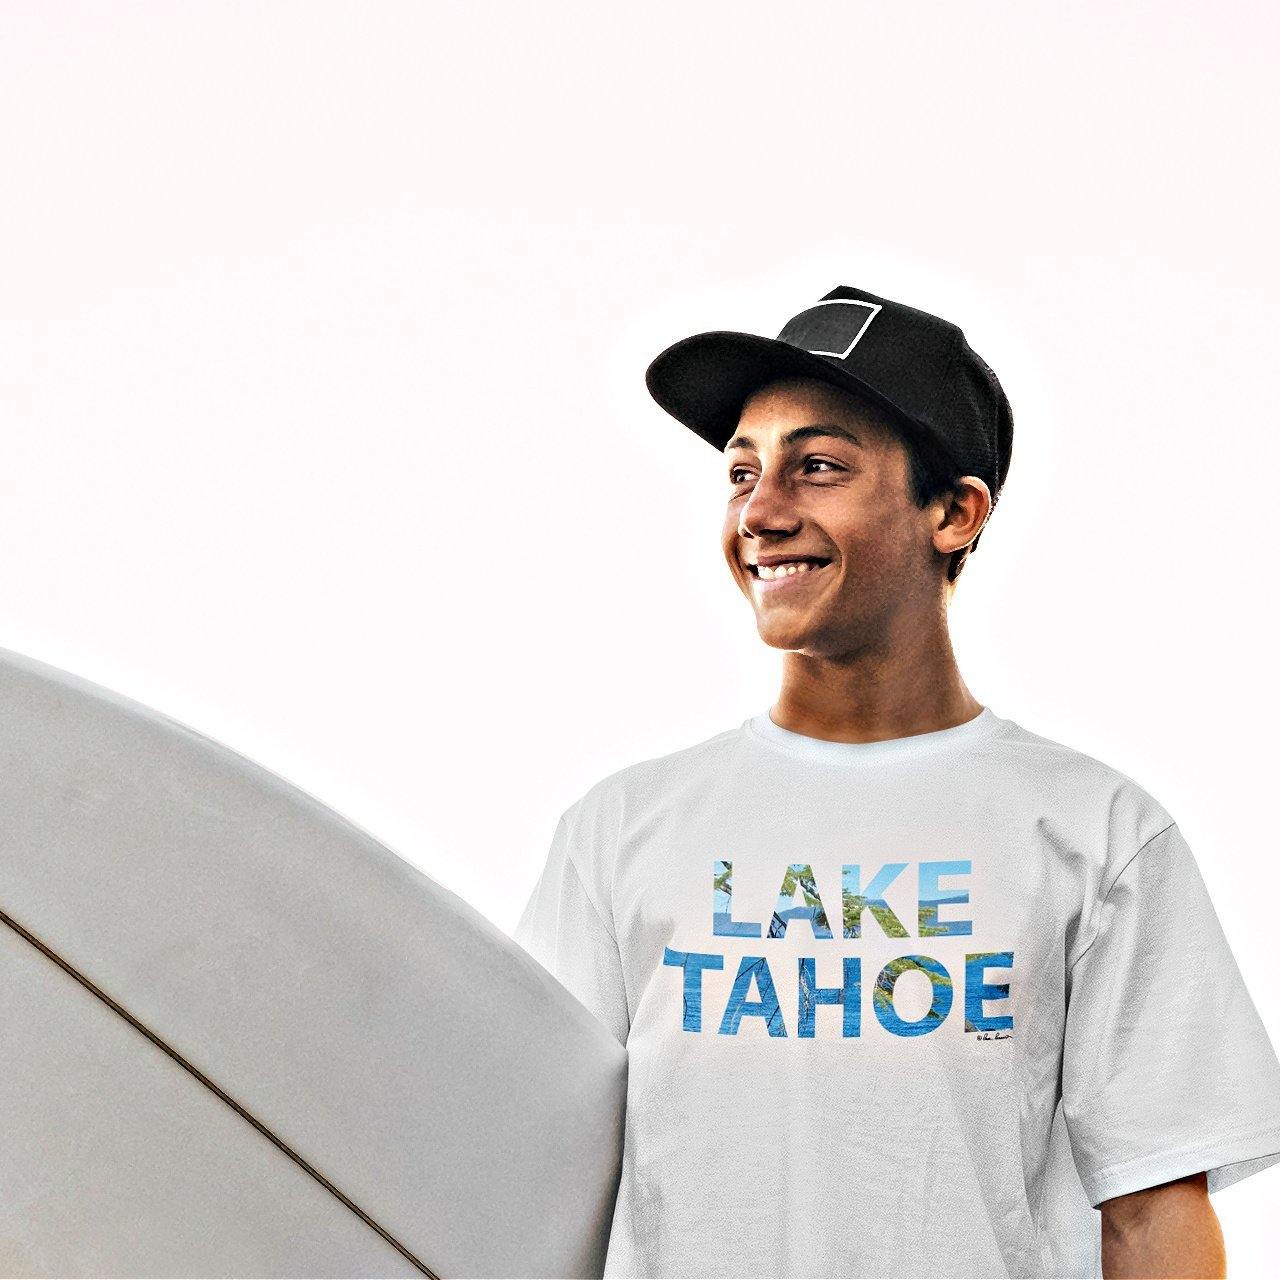 Mock up of our Lake-Tahoe Text T-shirt as worn by a man carrying a surfboard